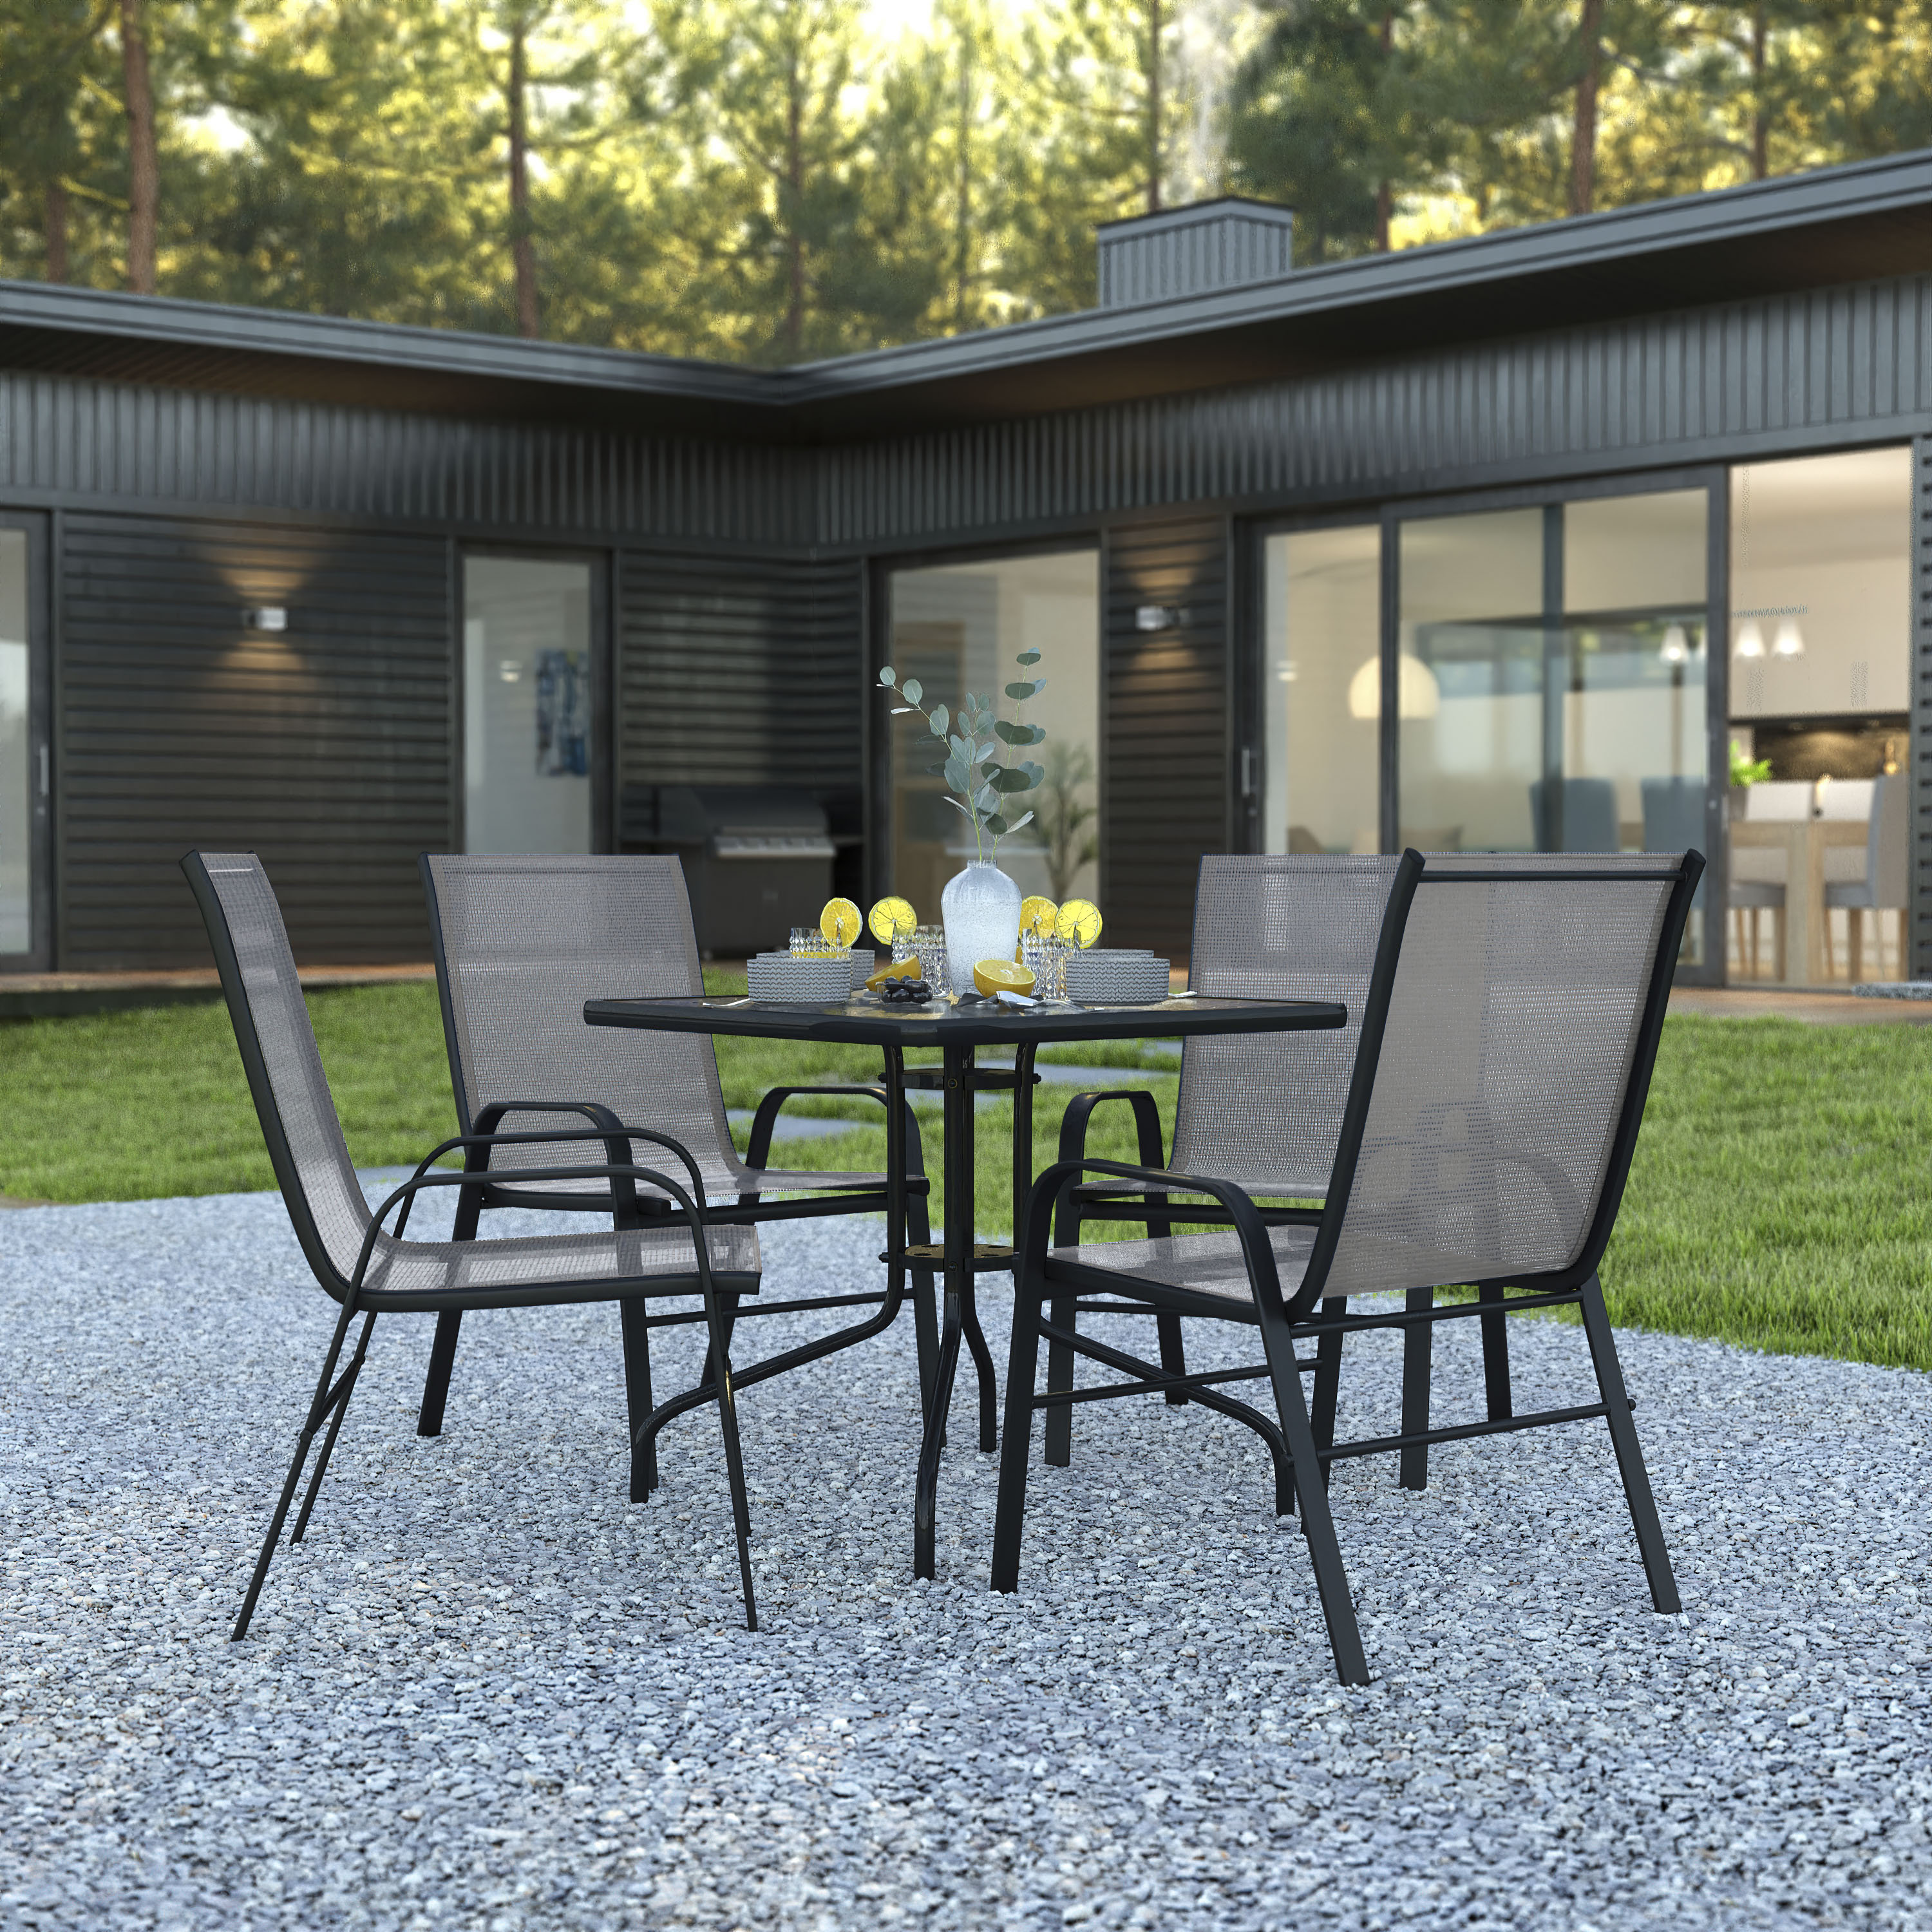 Artu 5 Piece Patio Dining Set - Glass Table, 4 Flex Stack Chairs